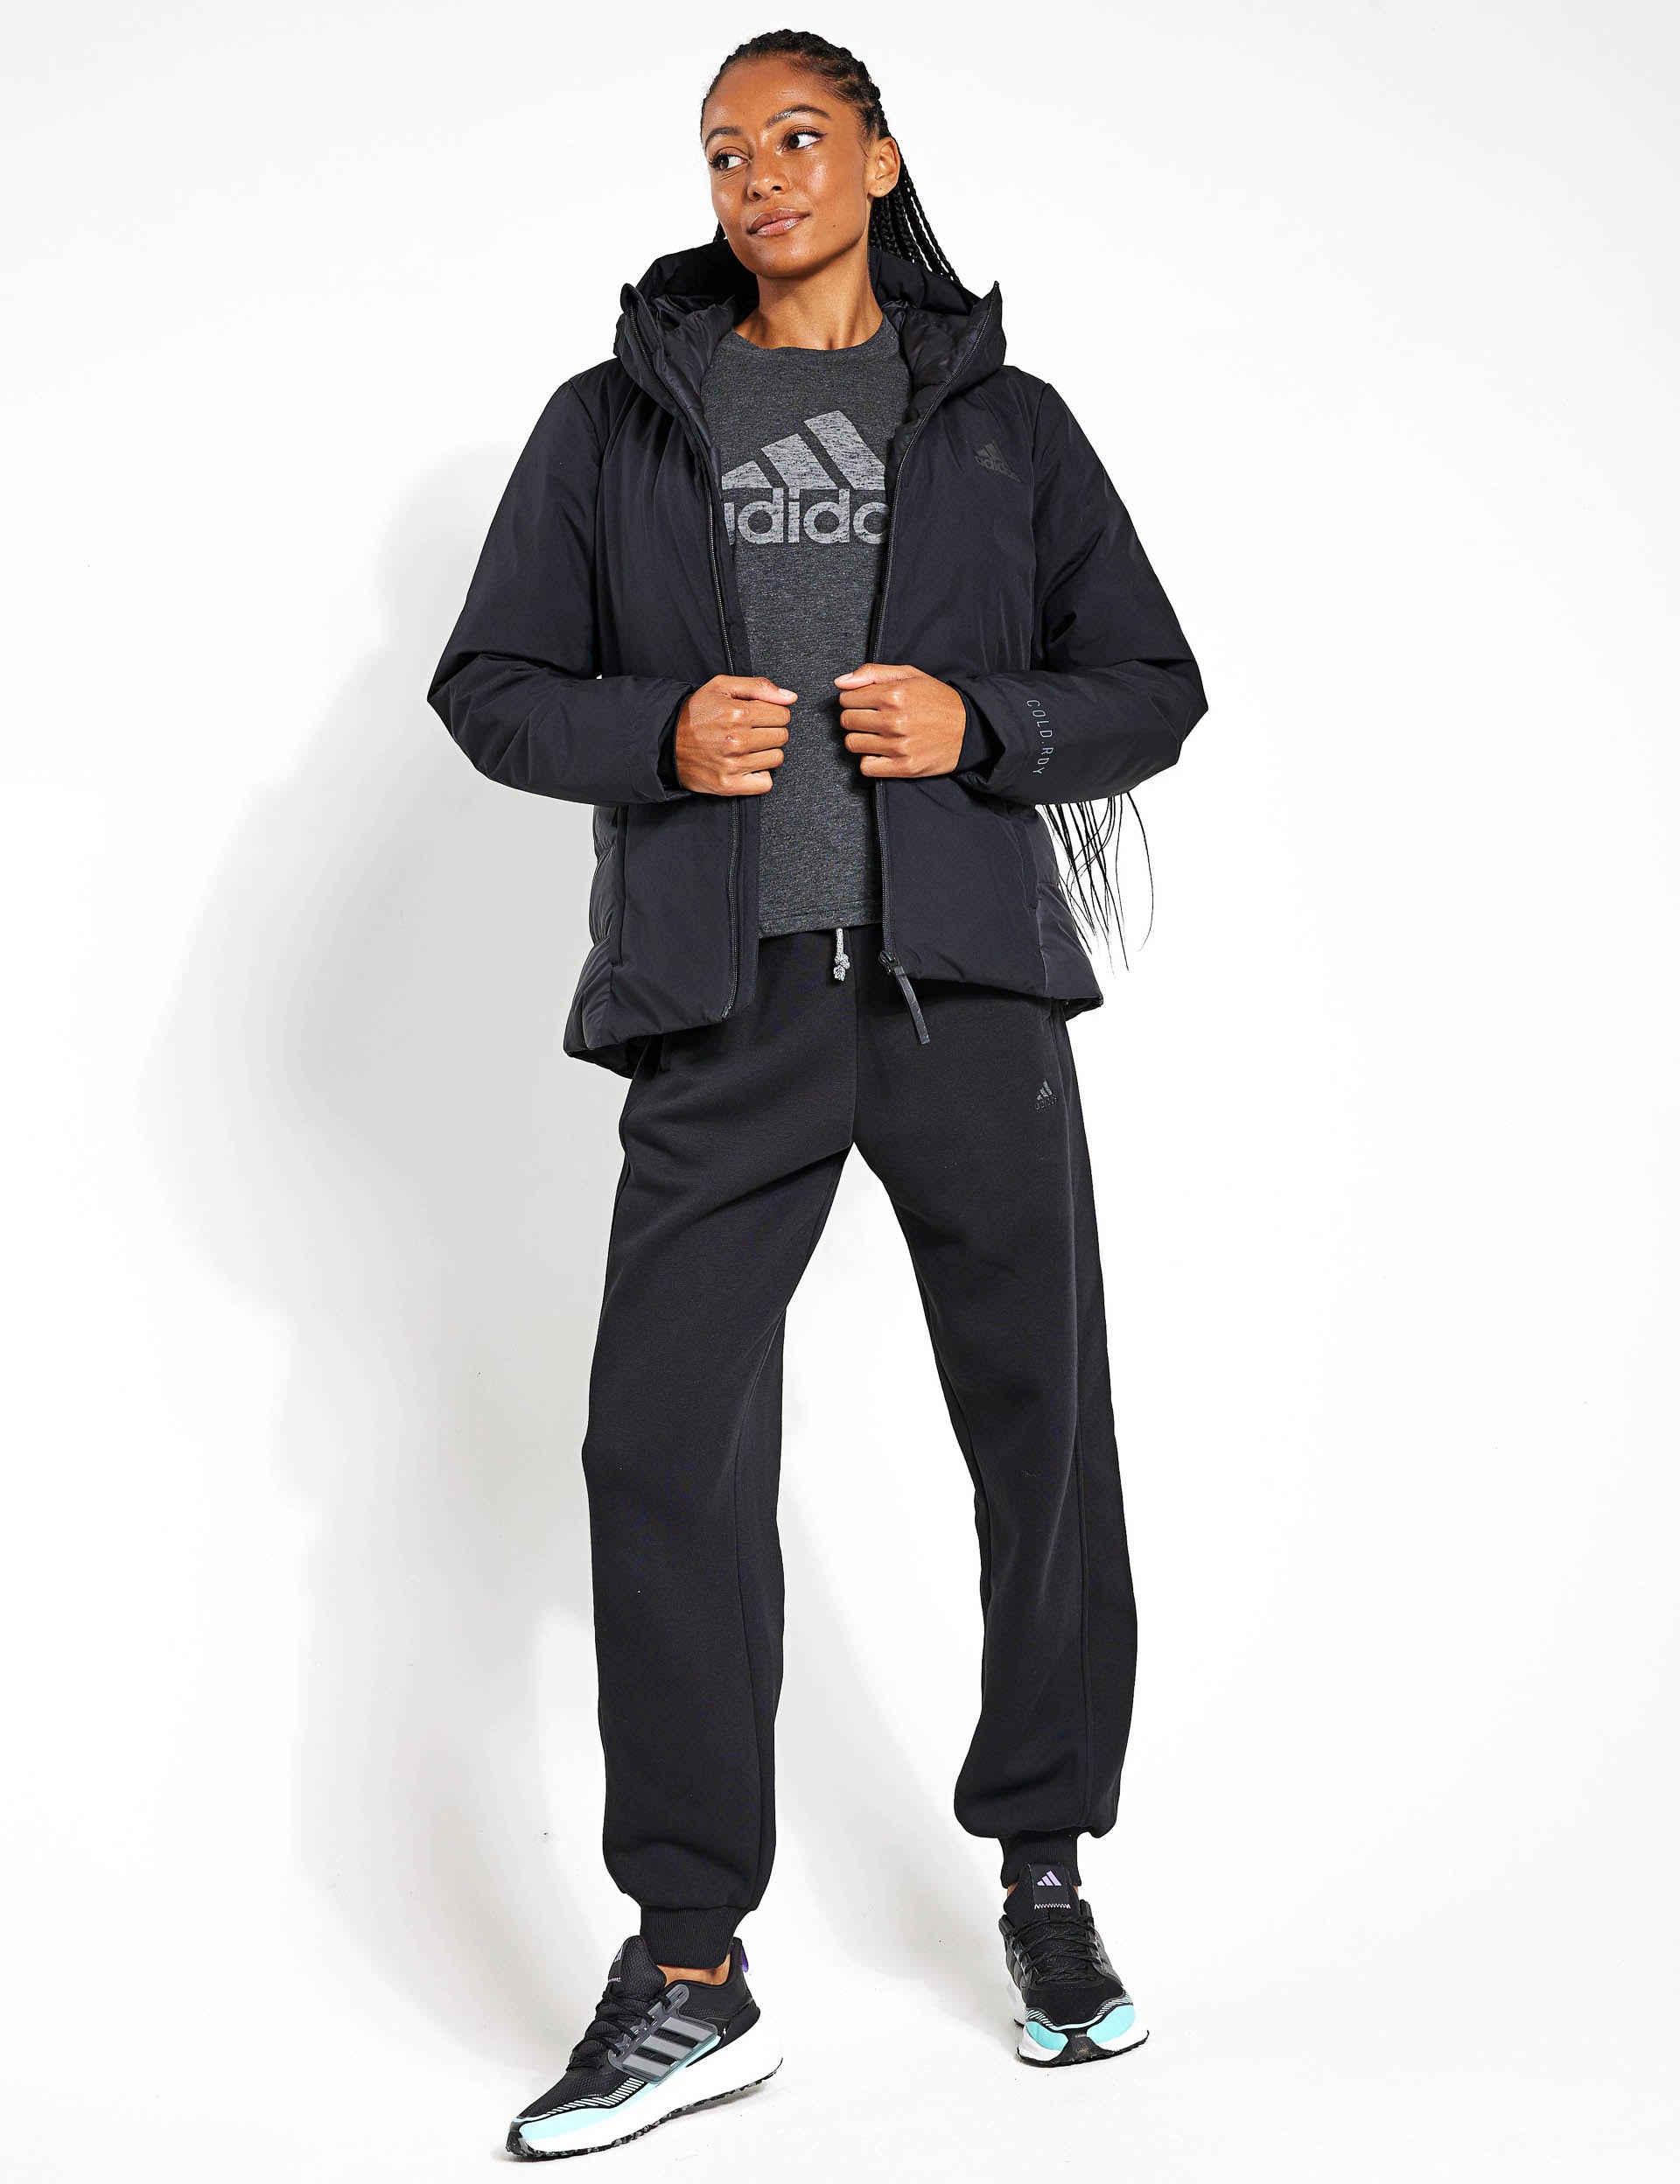 adidas | Traveer COLD.RDY Jacket - Black | The Sports Edit